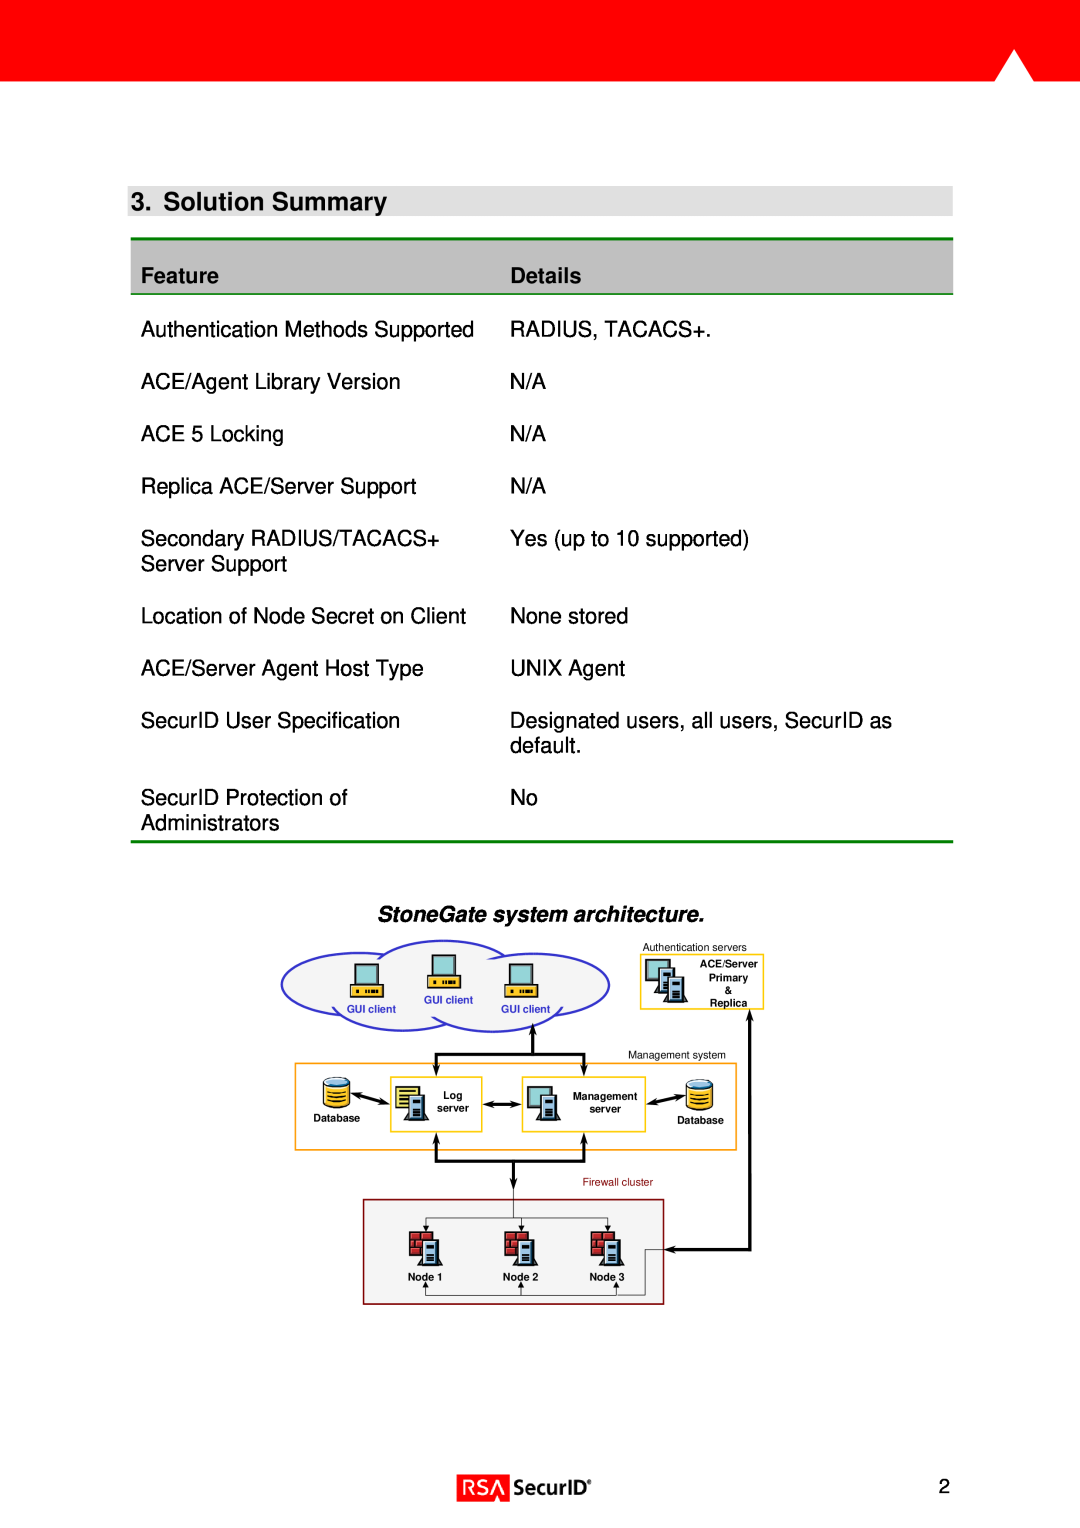 RSA Security 1.6.3 manual Solution Summary, Feature, Details, StoneGate system architecture 